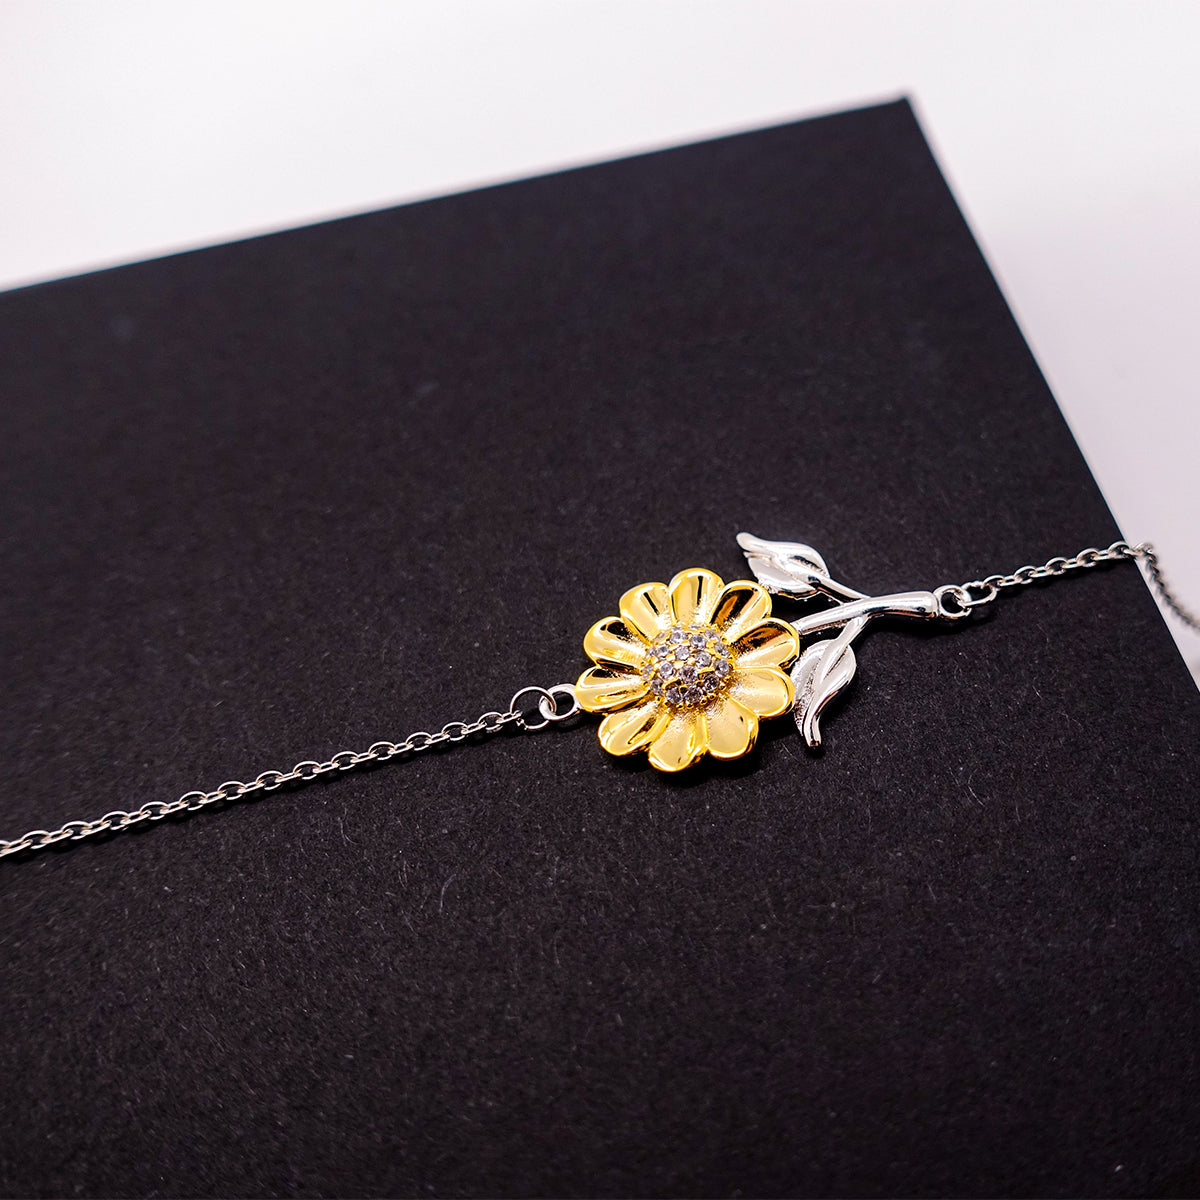 Goddad Sunflower Bracelet Engraved Special Place in Heart Inspiration Graduation Gift for Him and Her